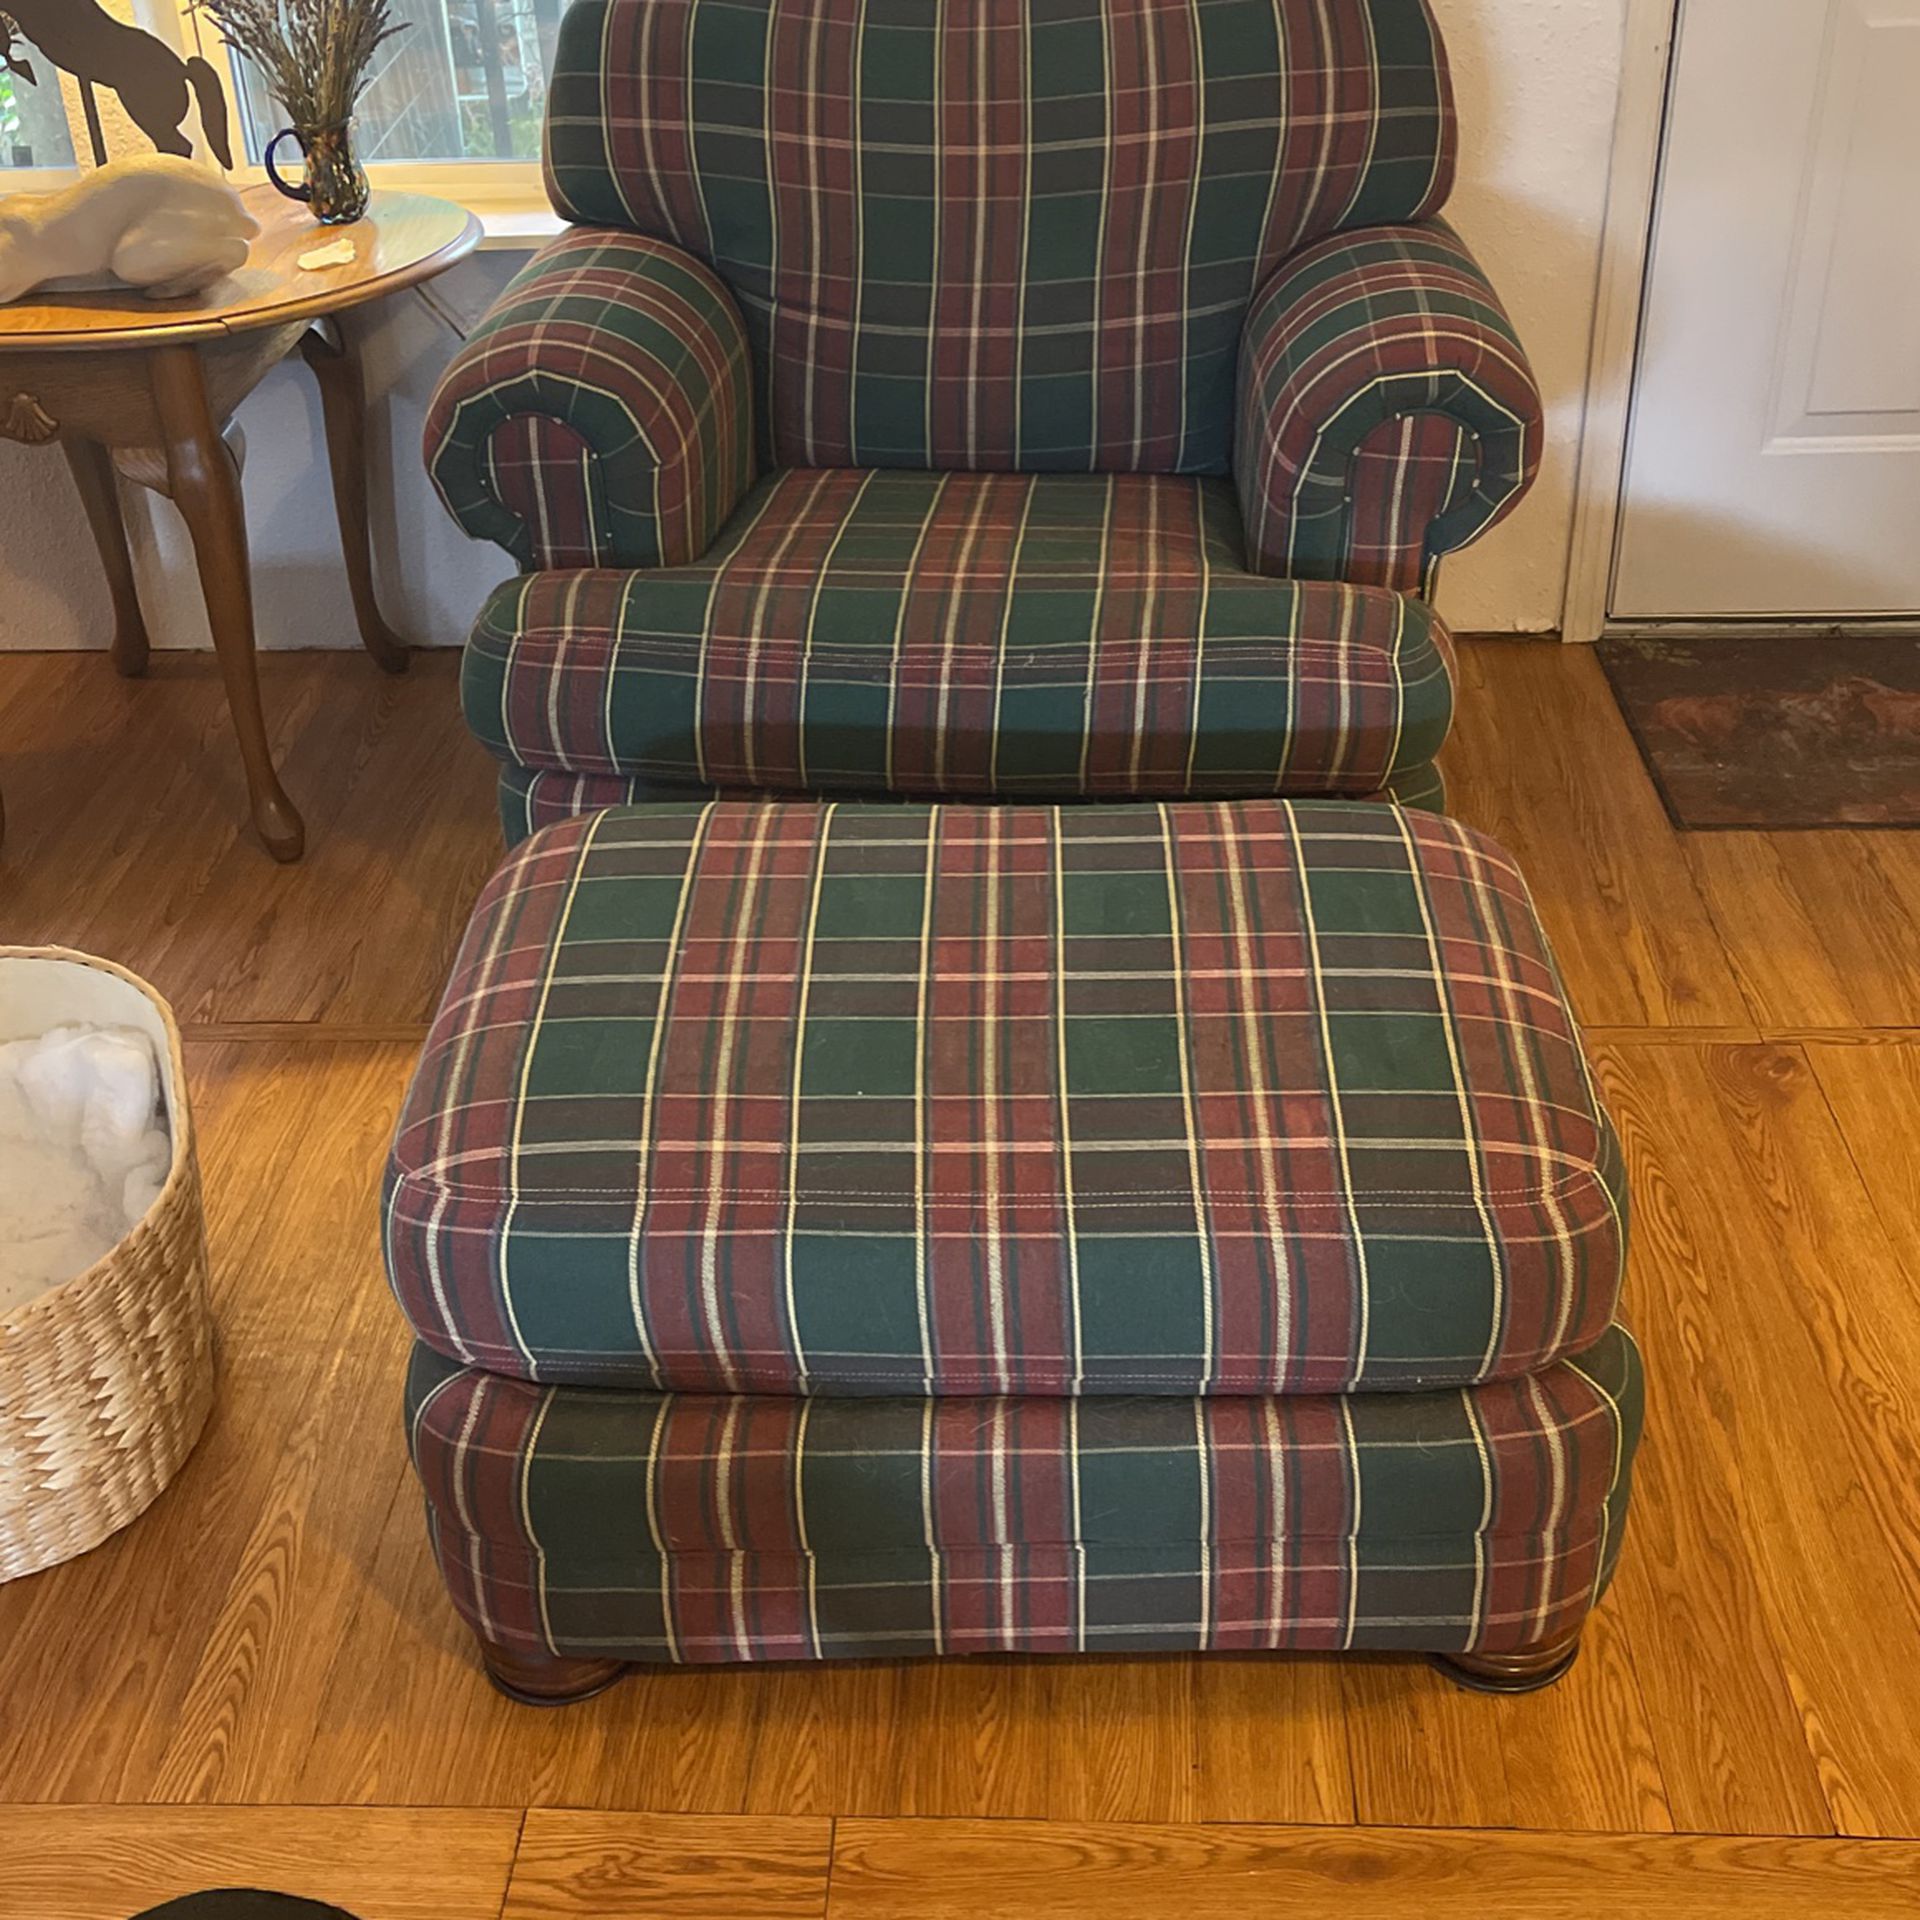 Chair with Ottoman /Footstool 